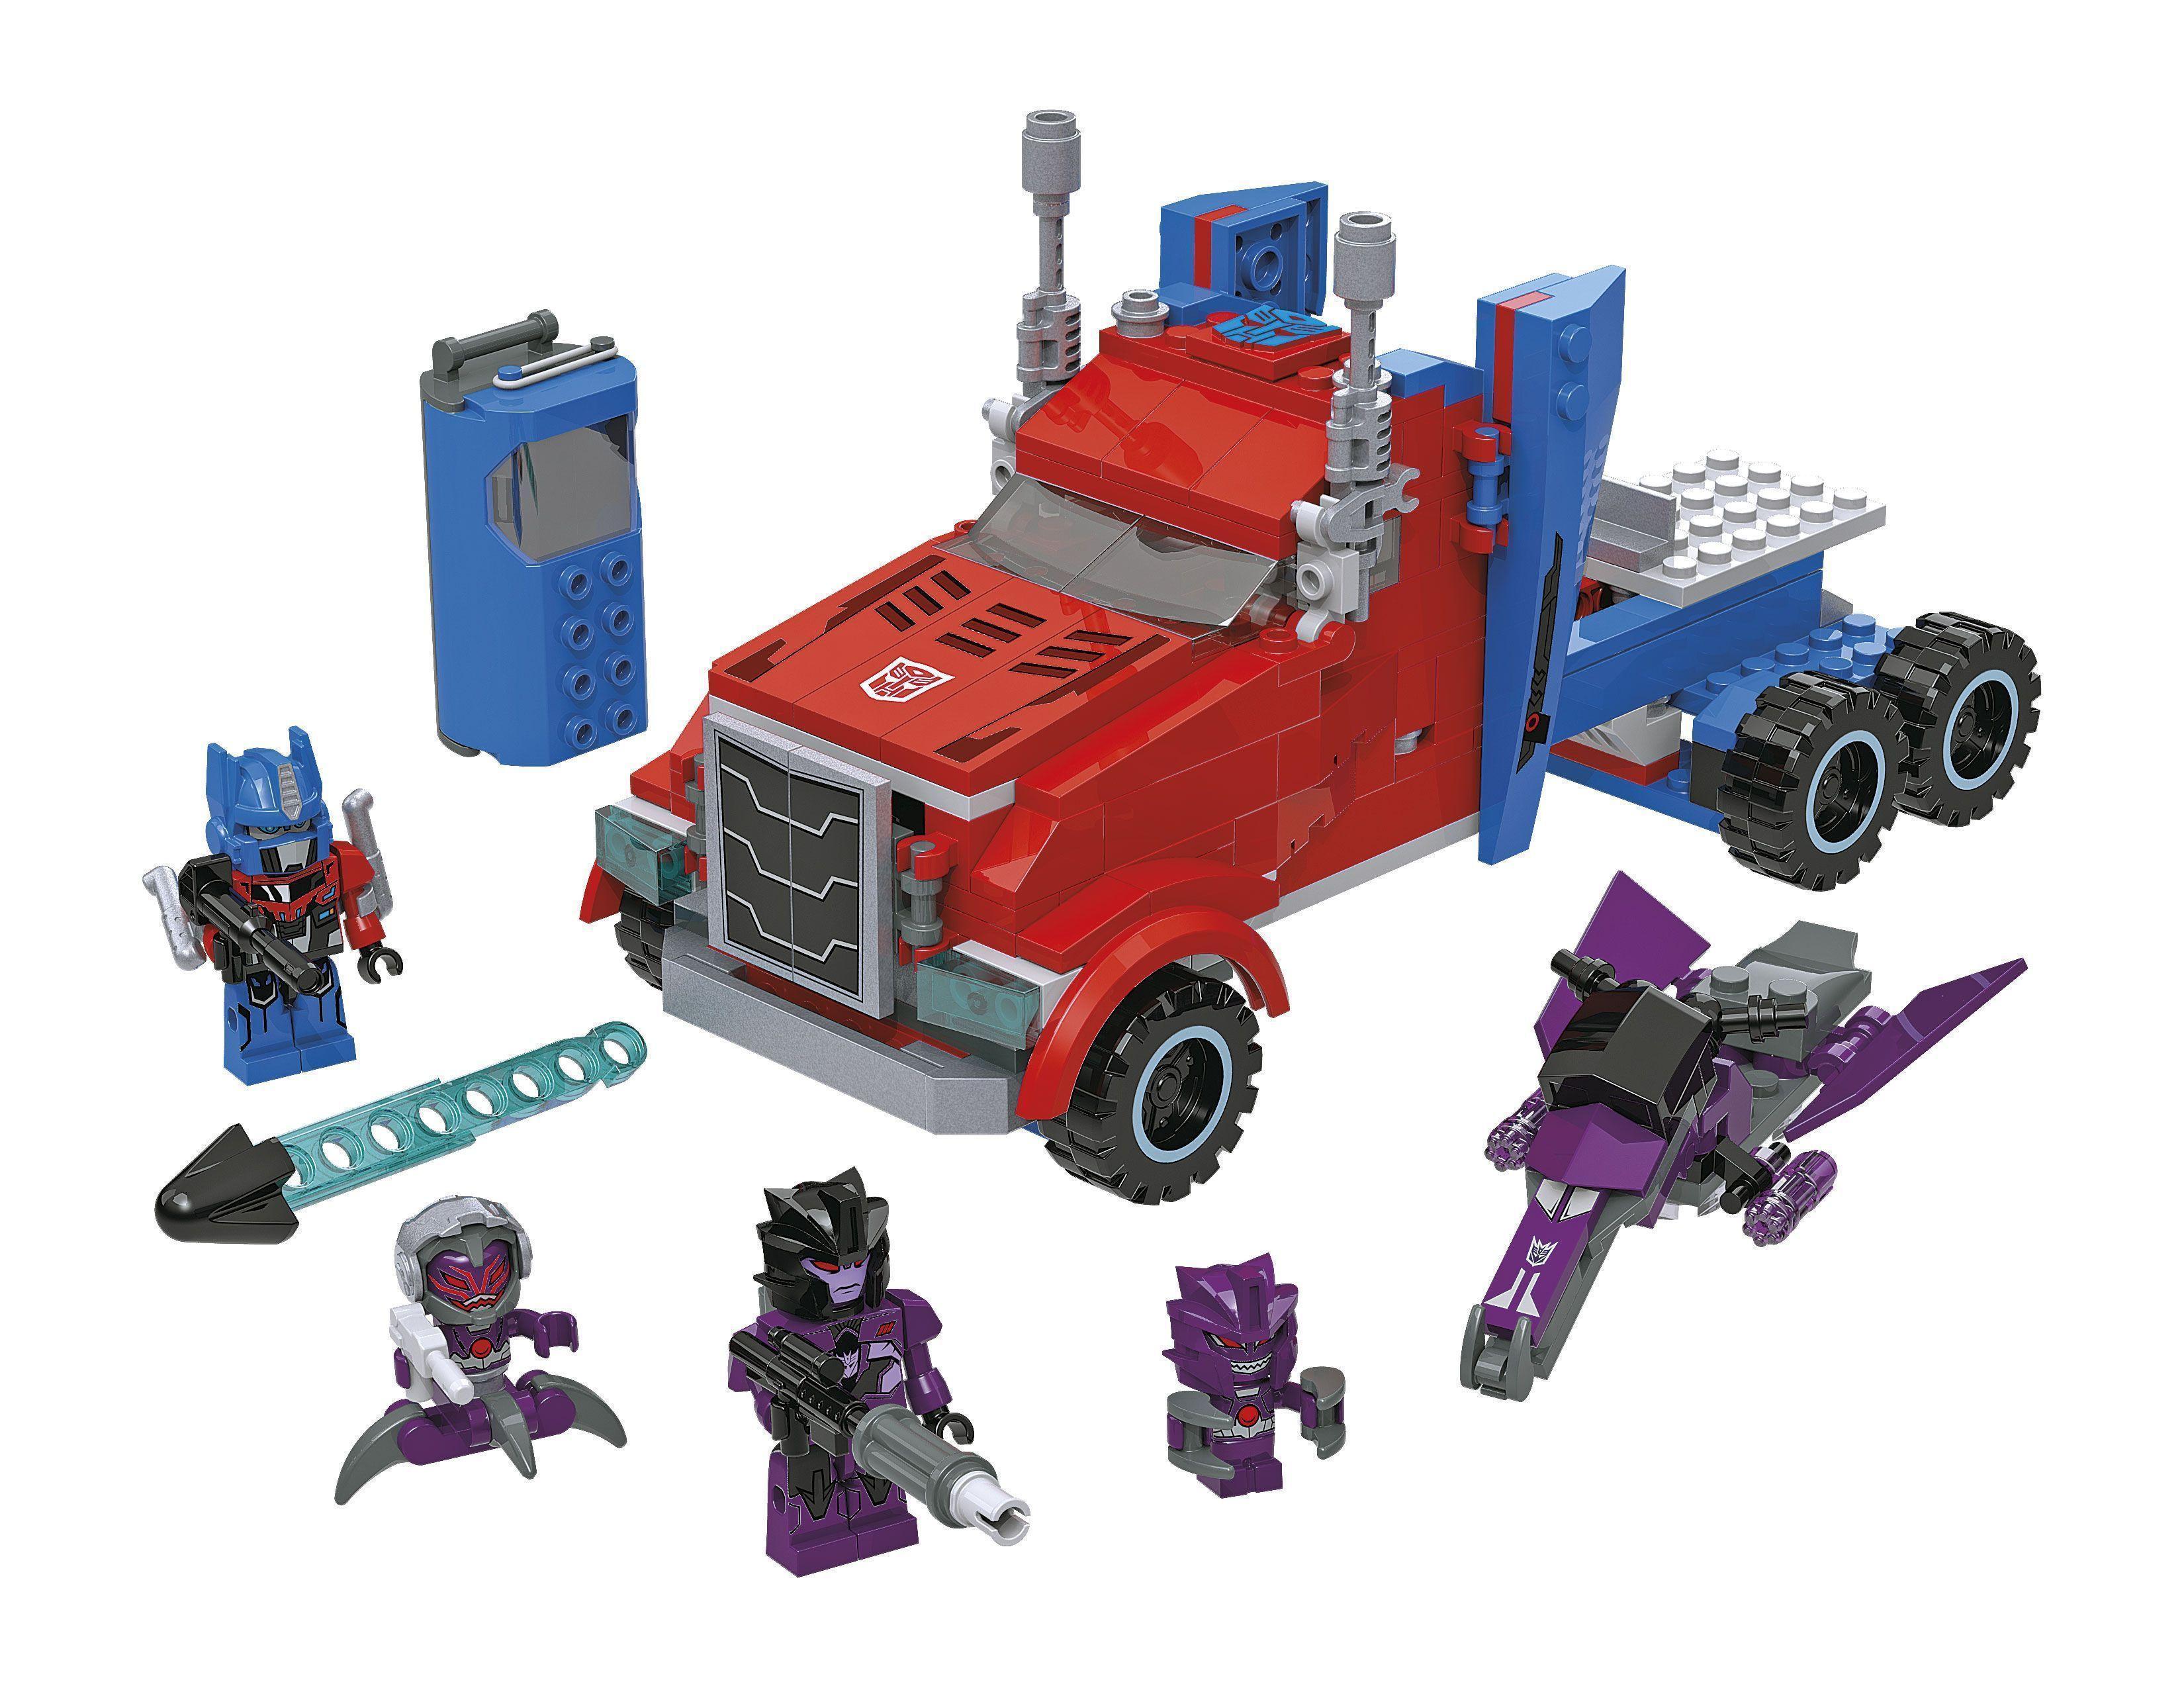 Transformers NYCC Kre O Official Image